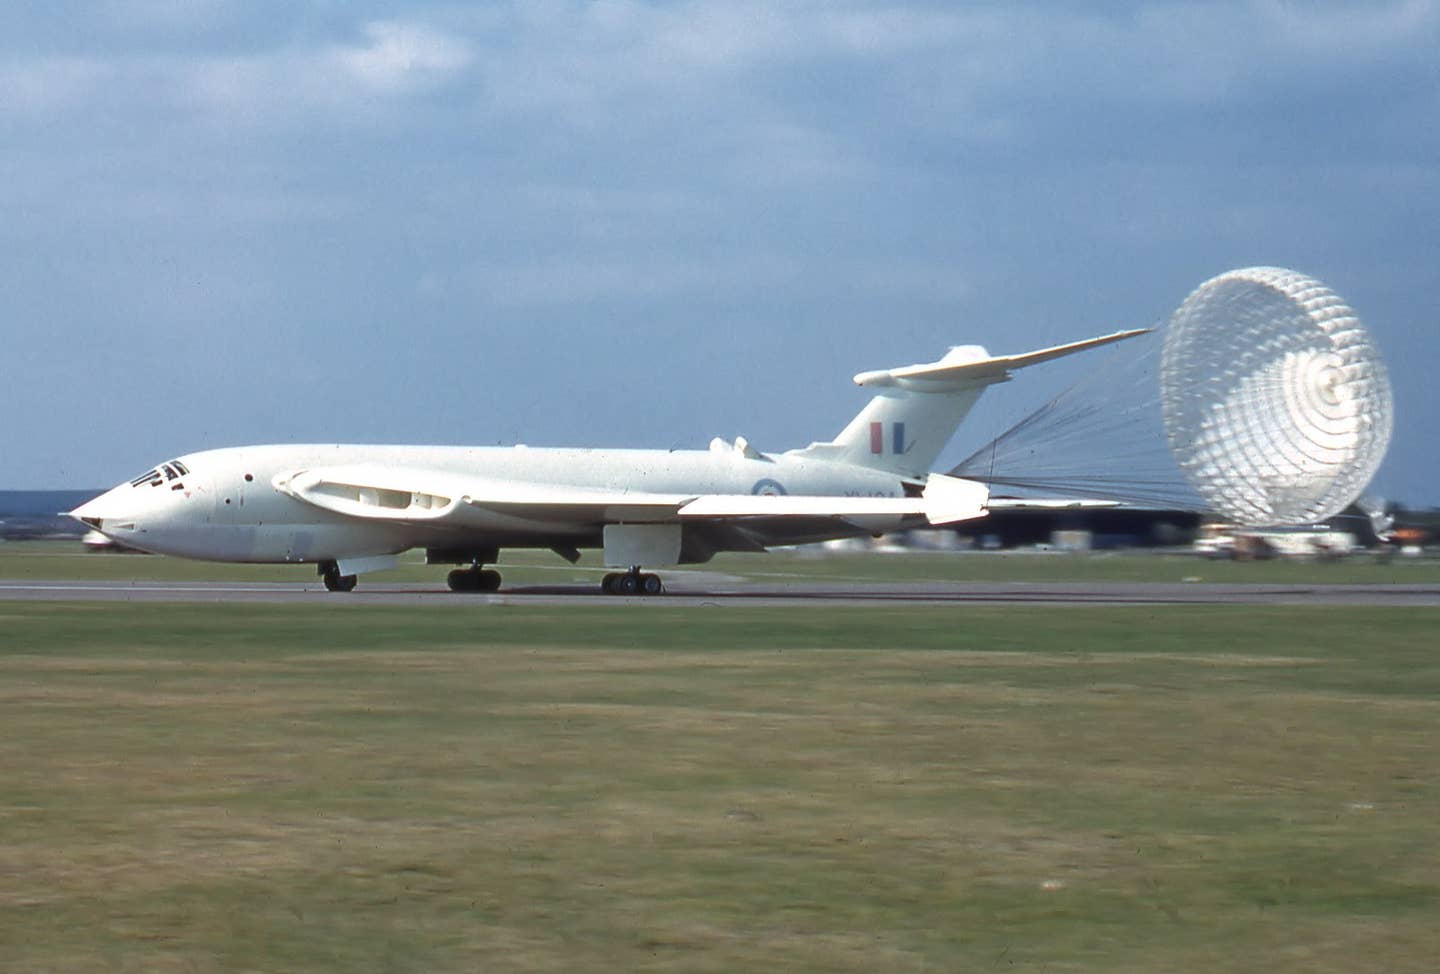 handley page victor V bombers